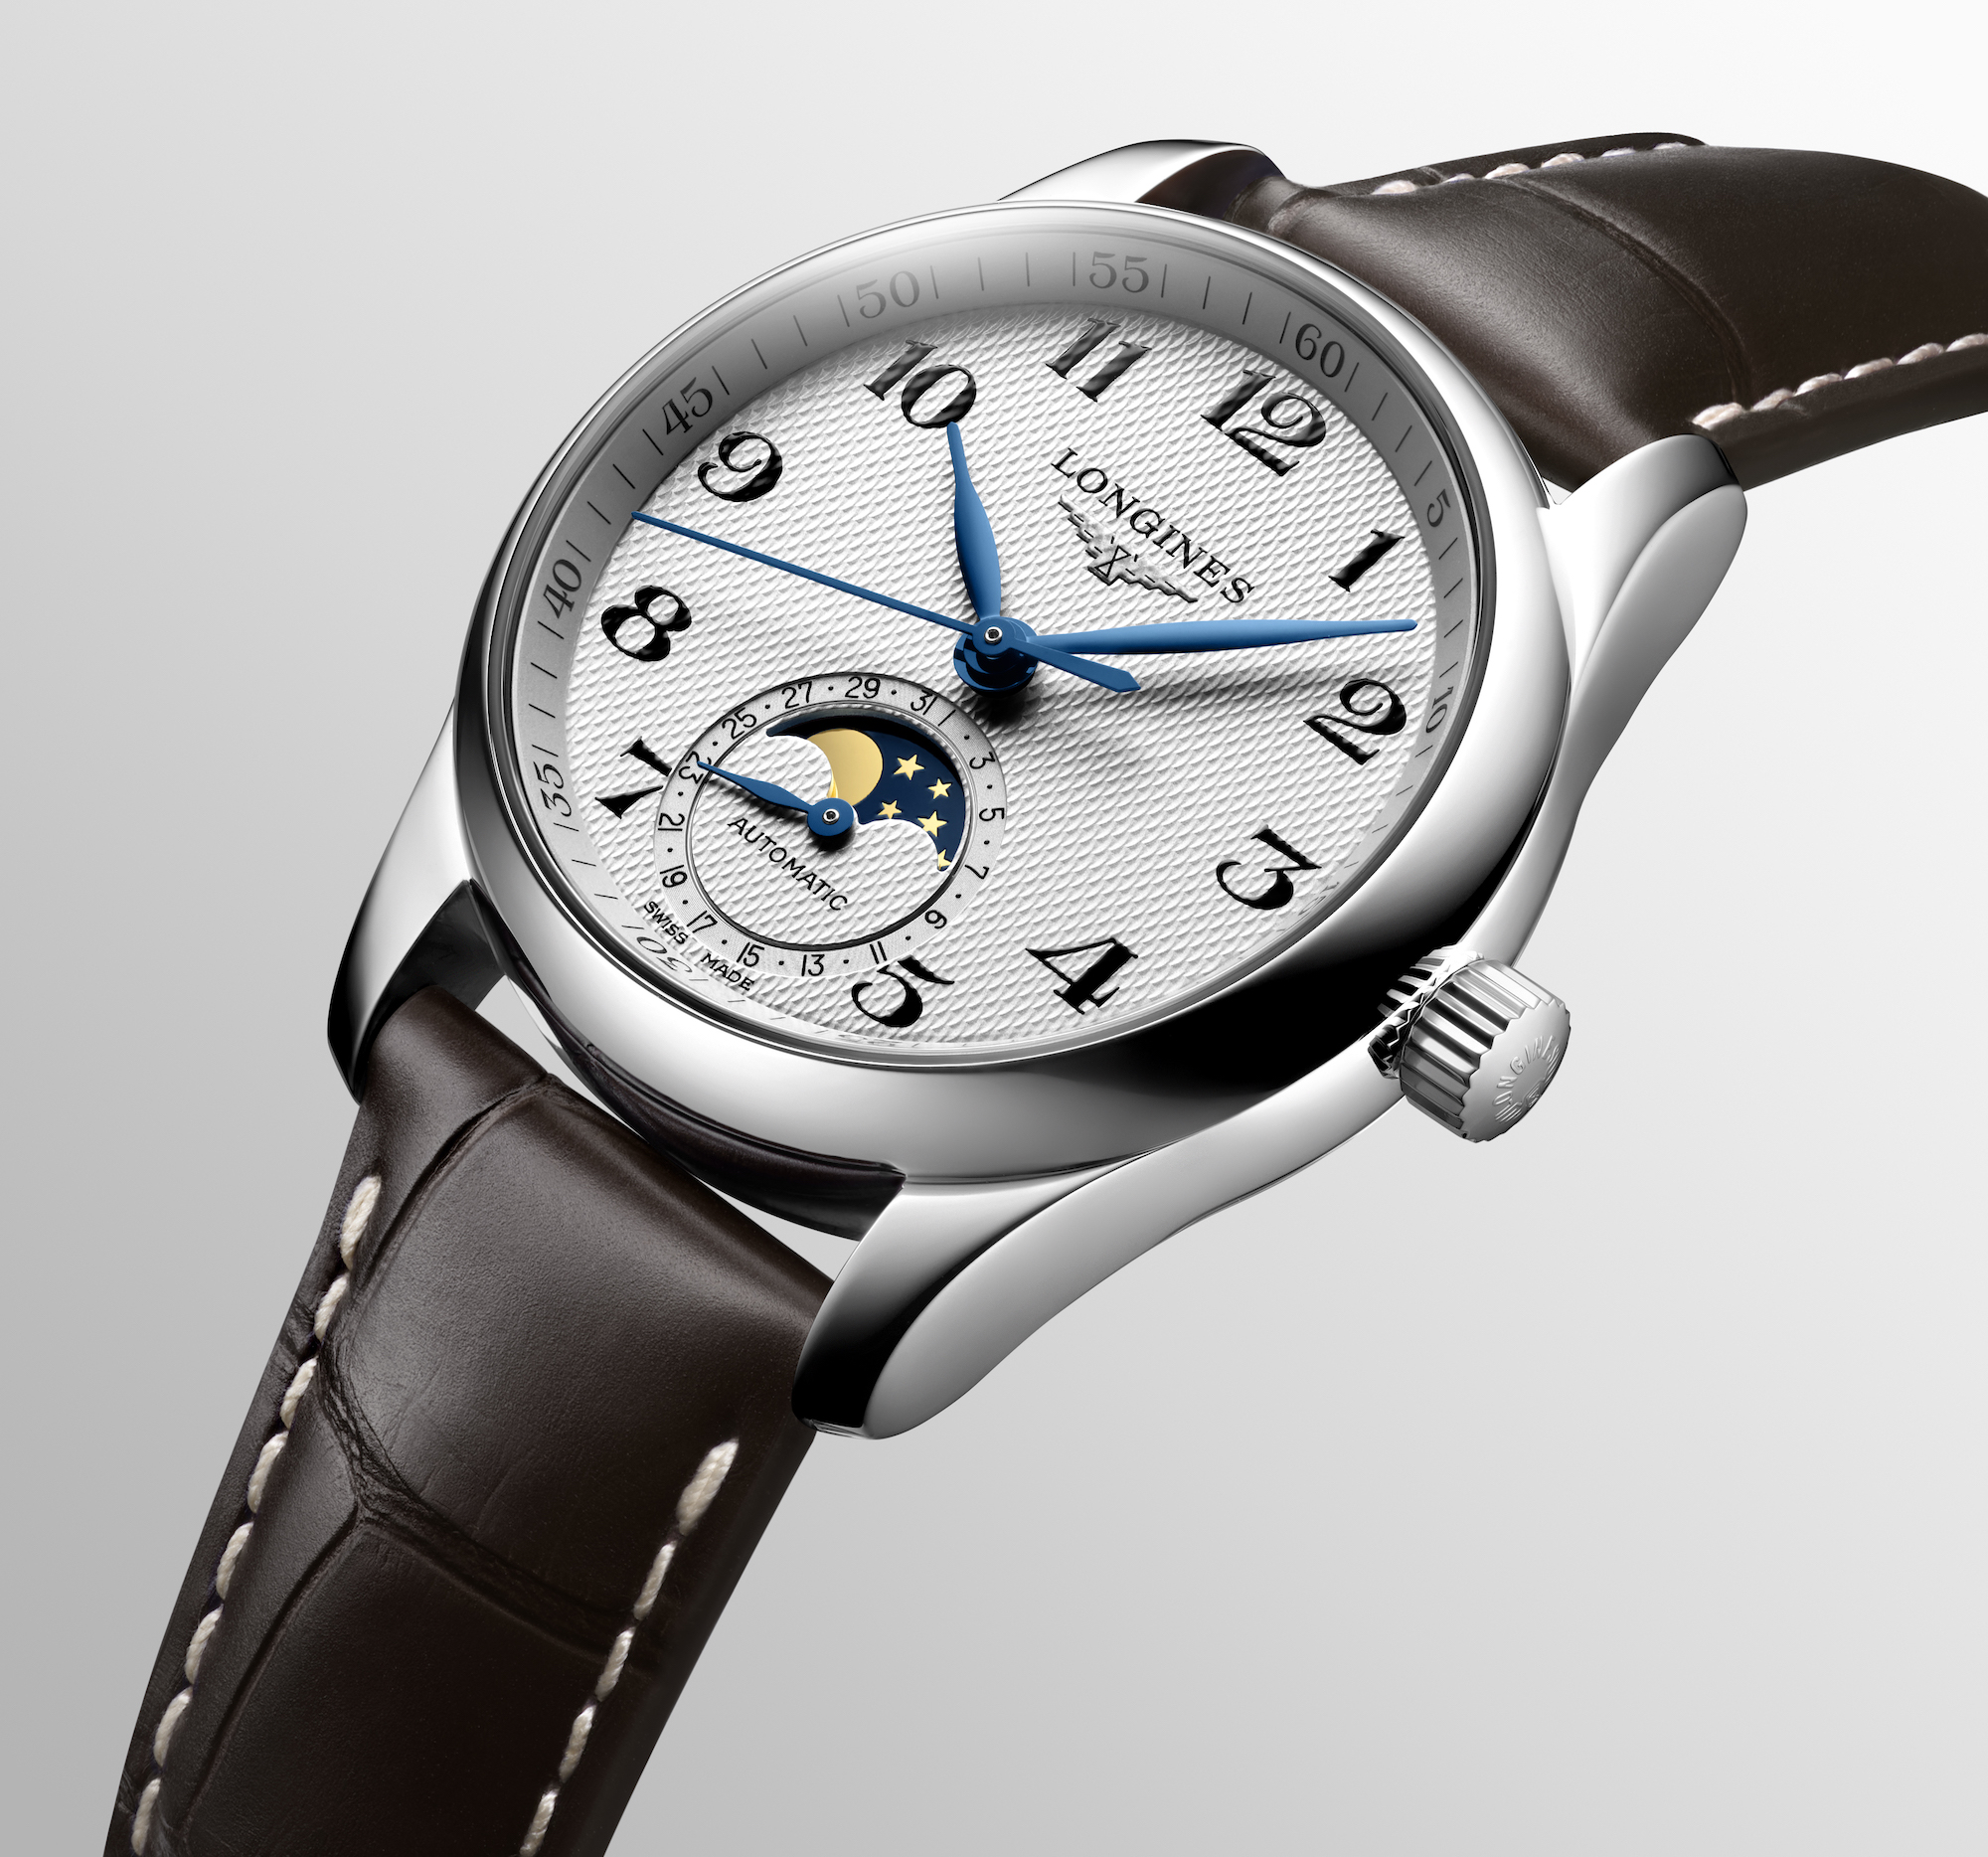 The Longines Master Collection L2.409.4.78.3 Lifestyle